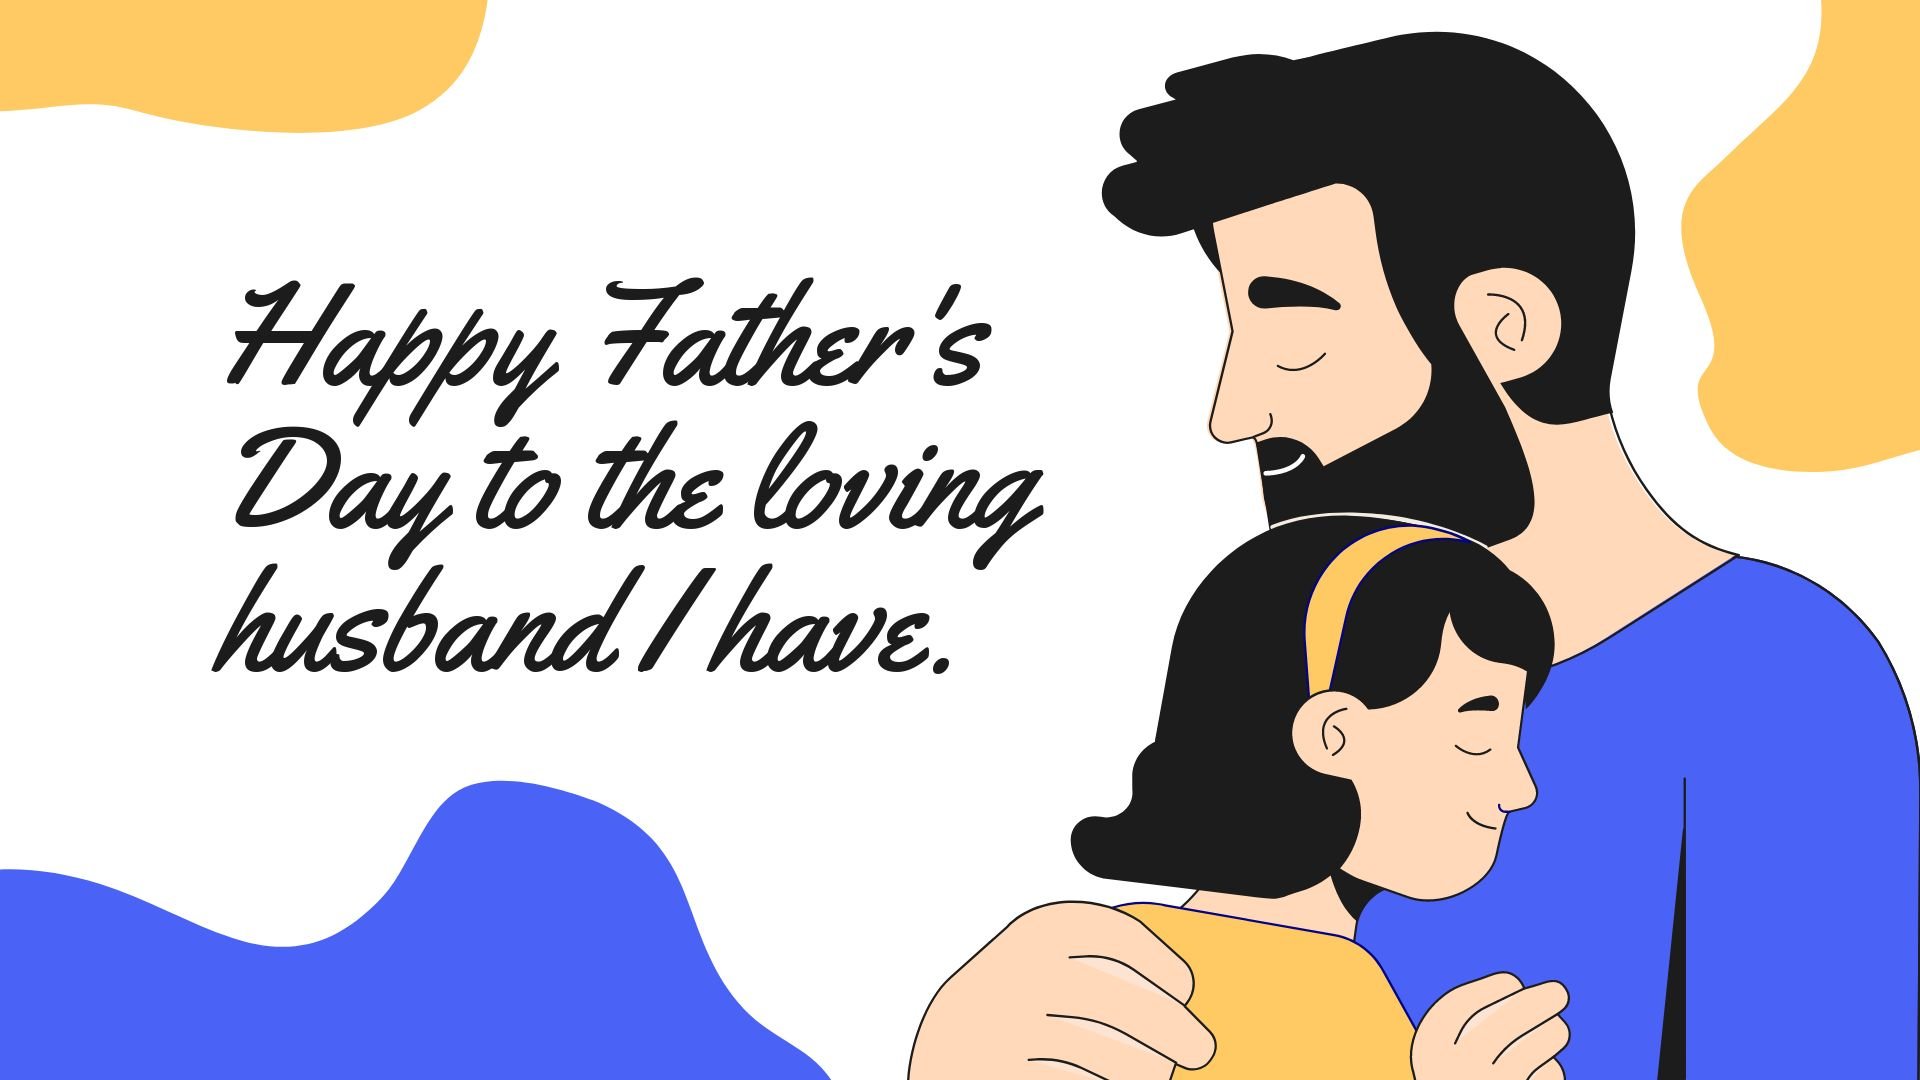 Free Happy Father's Day Husband Image in JPG